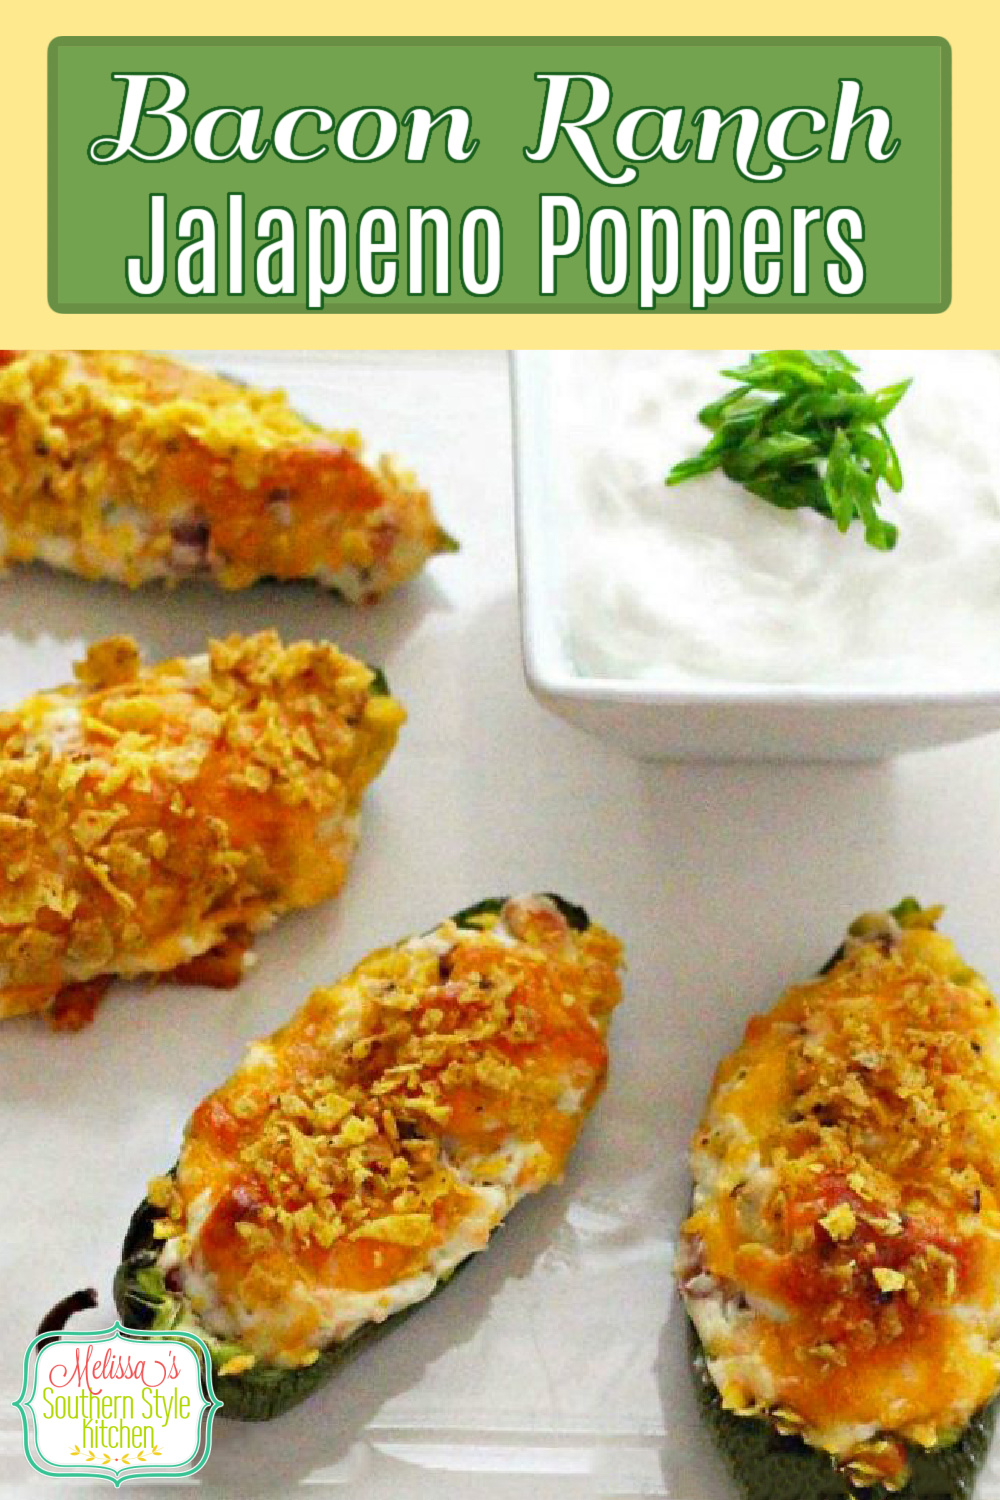 Bring the heat to your appetizer menu with these Bacon Ranch Jalapeno Poppers that are baked not fried! #jalapenopoppers #jalapenos #poppers #bakedpoppers #bacon #baconranchdressing #ranchdressing #bakedjalapenopoppers #appetizers #gamedayfood #partyfood #southernrecipes #southernfood